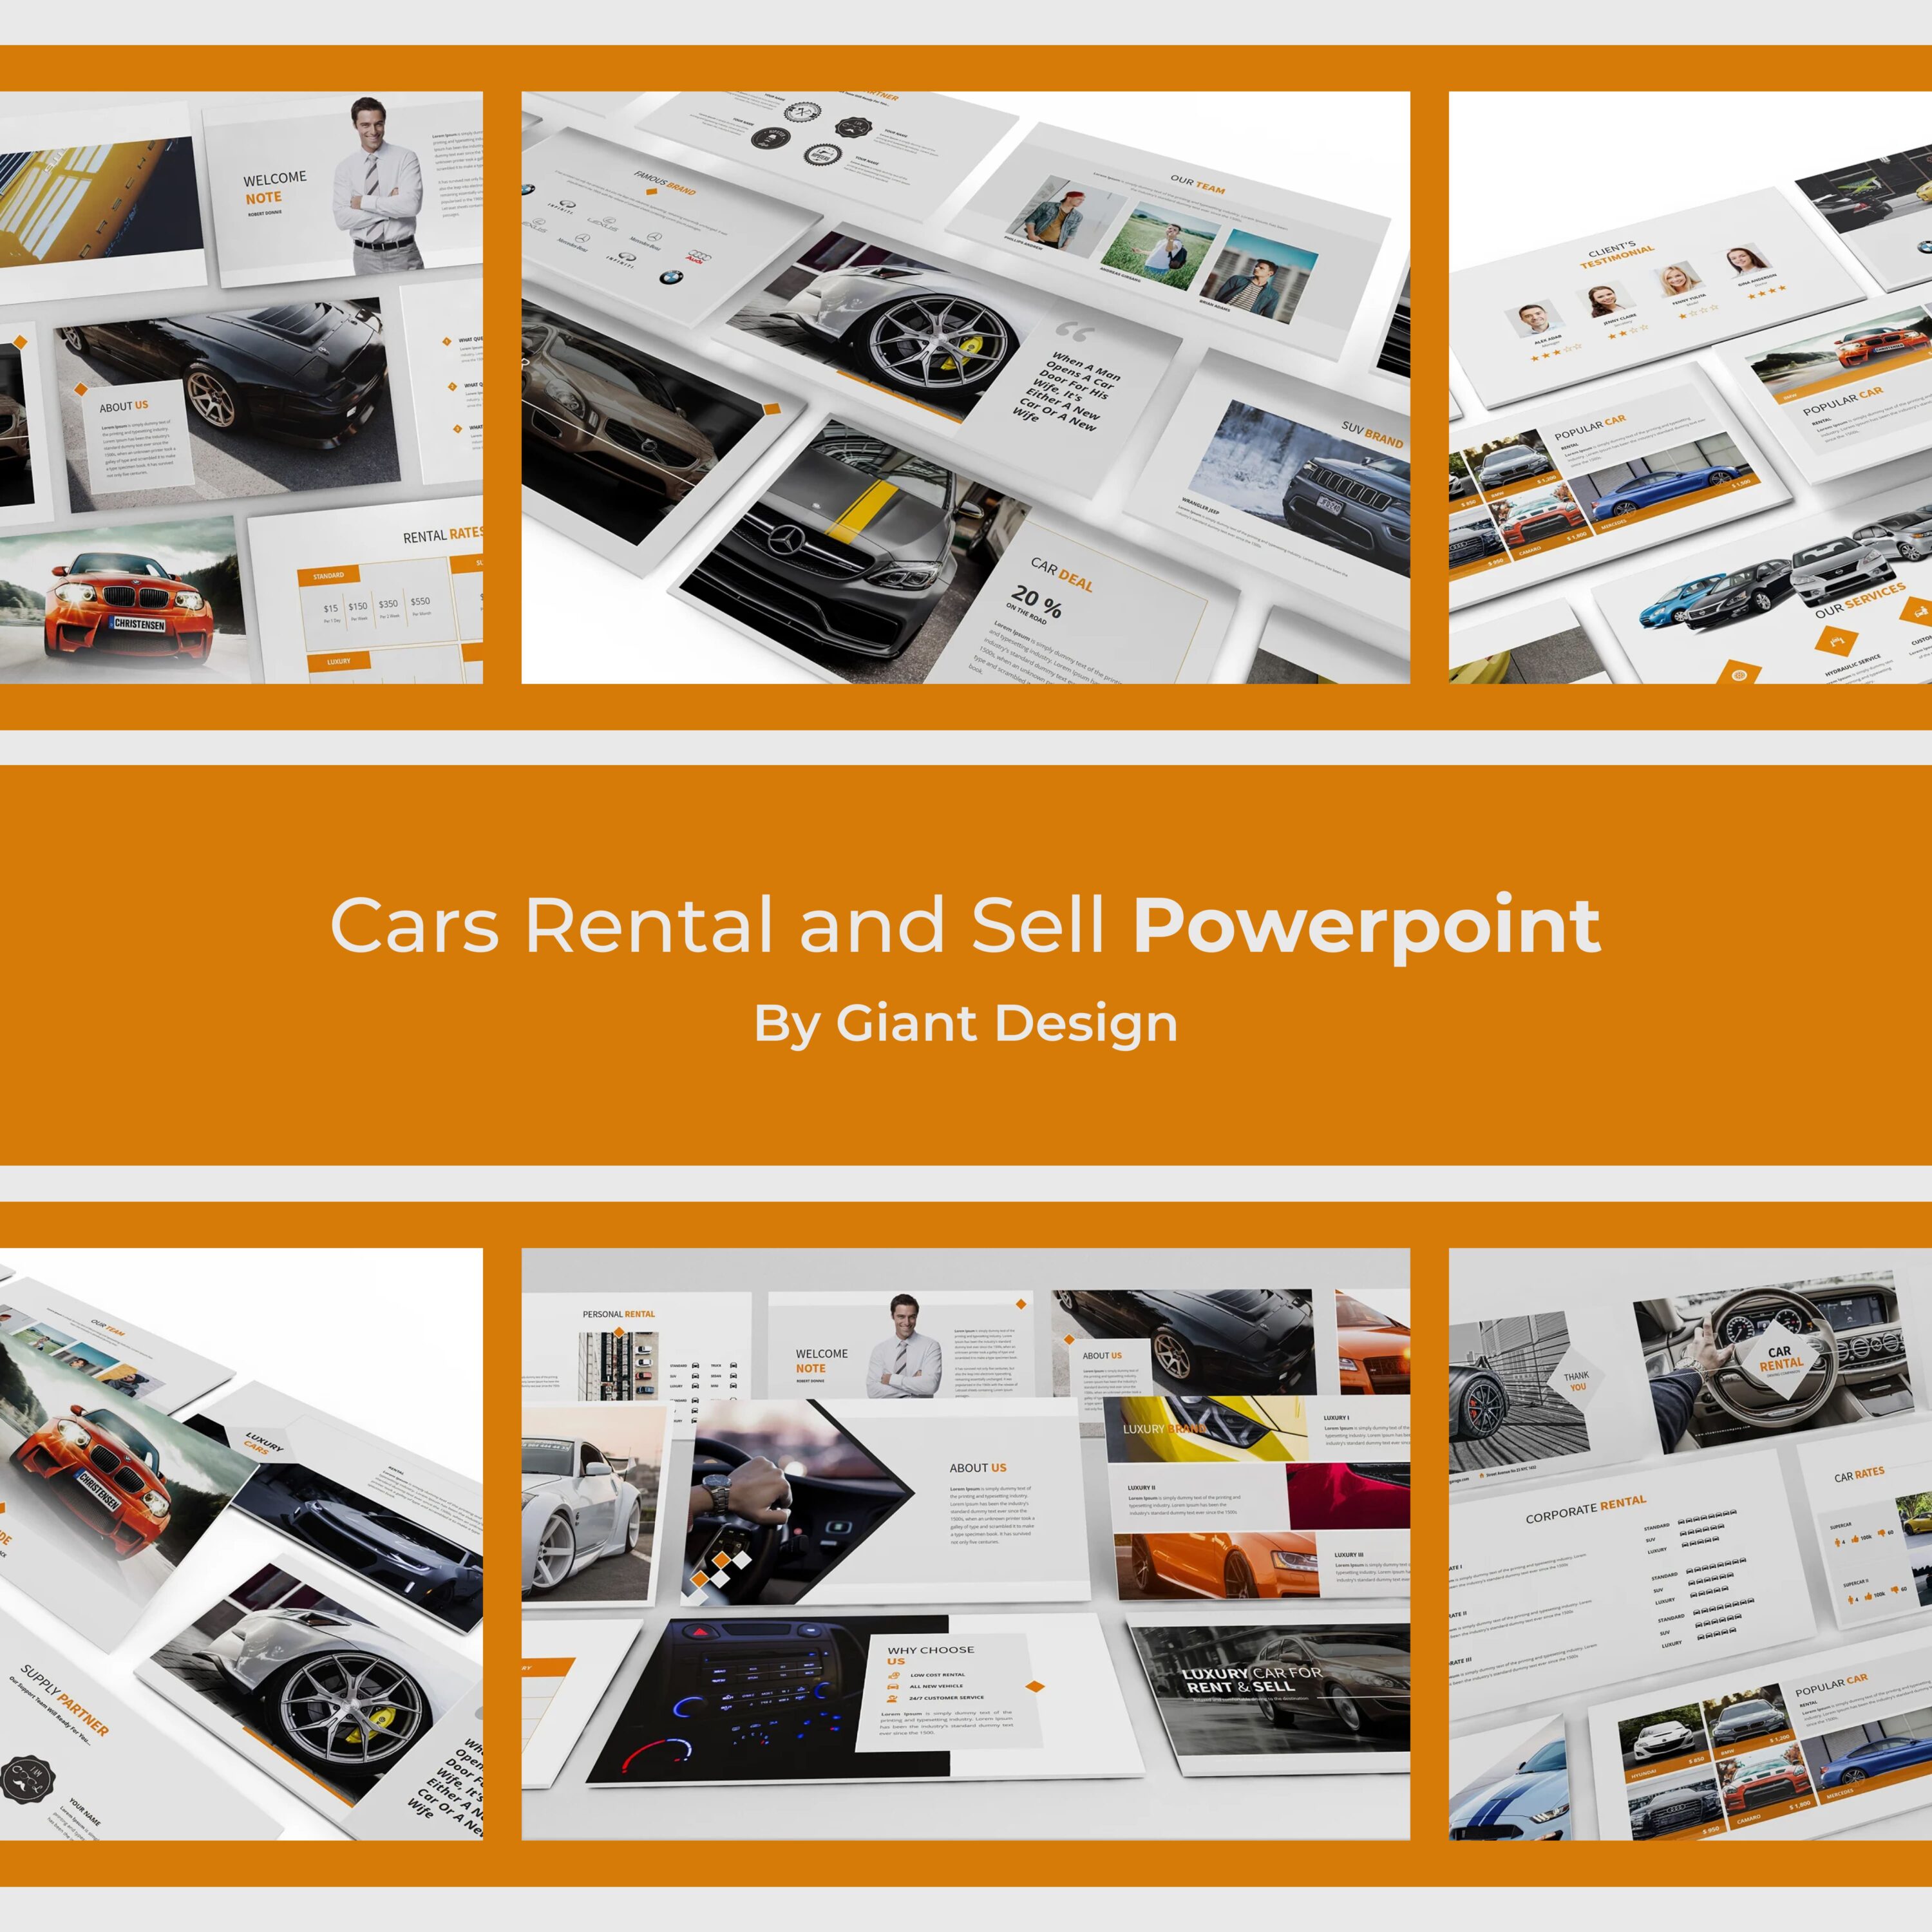 Cars Rental and Sell Powerpoint.